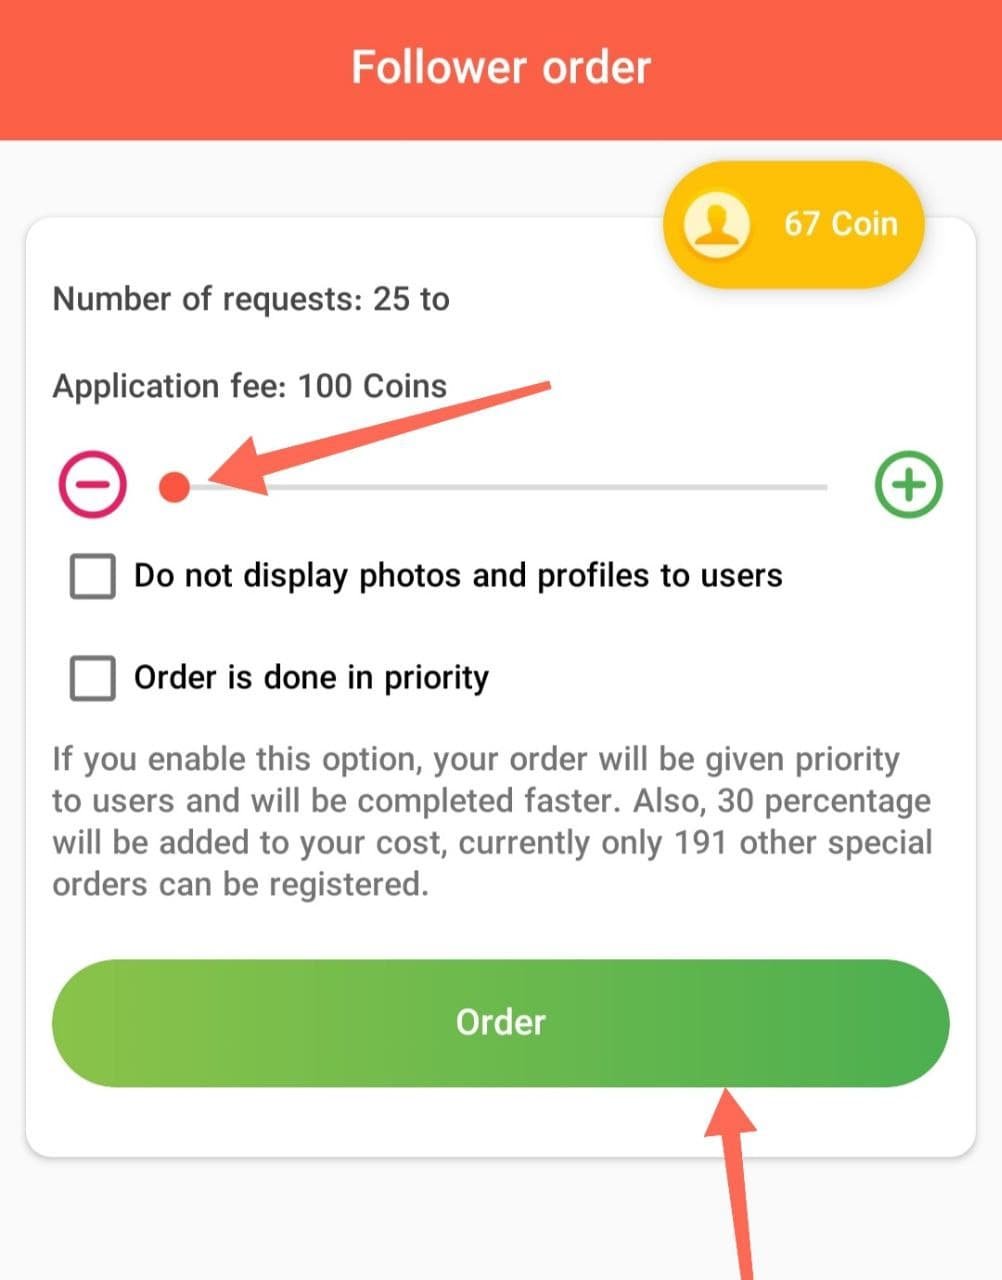 Order Followers Based On Coins